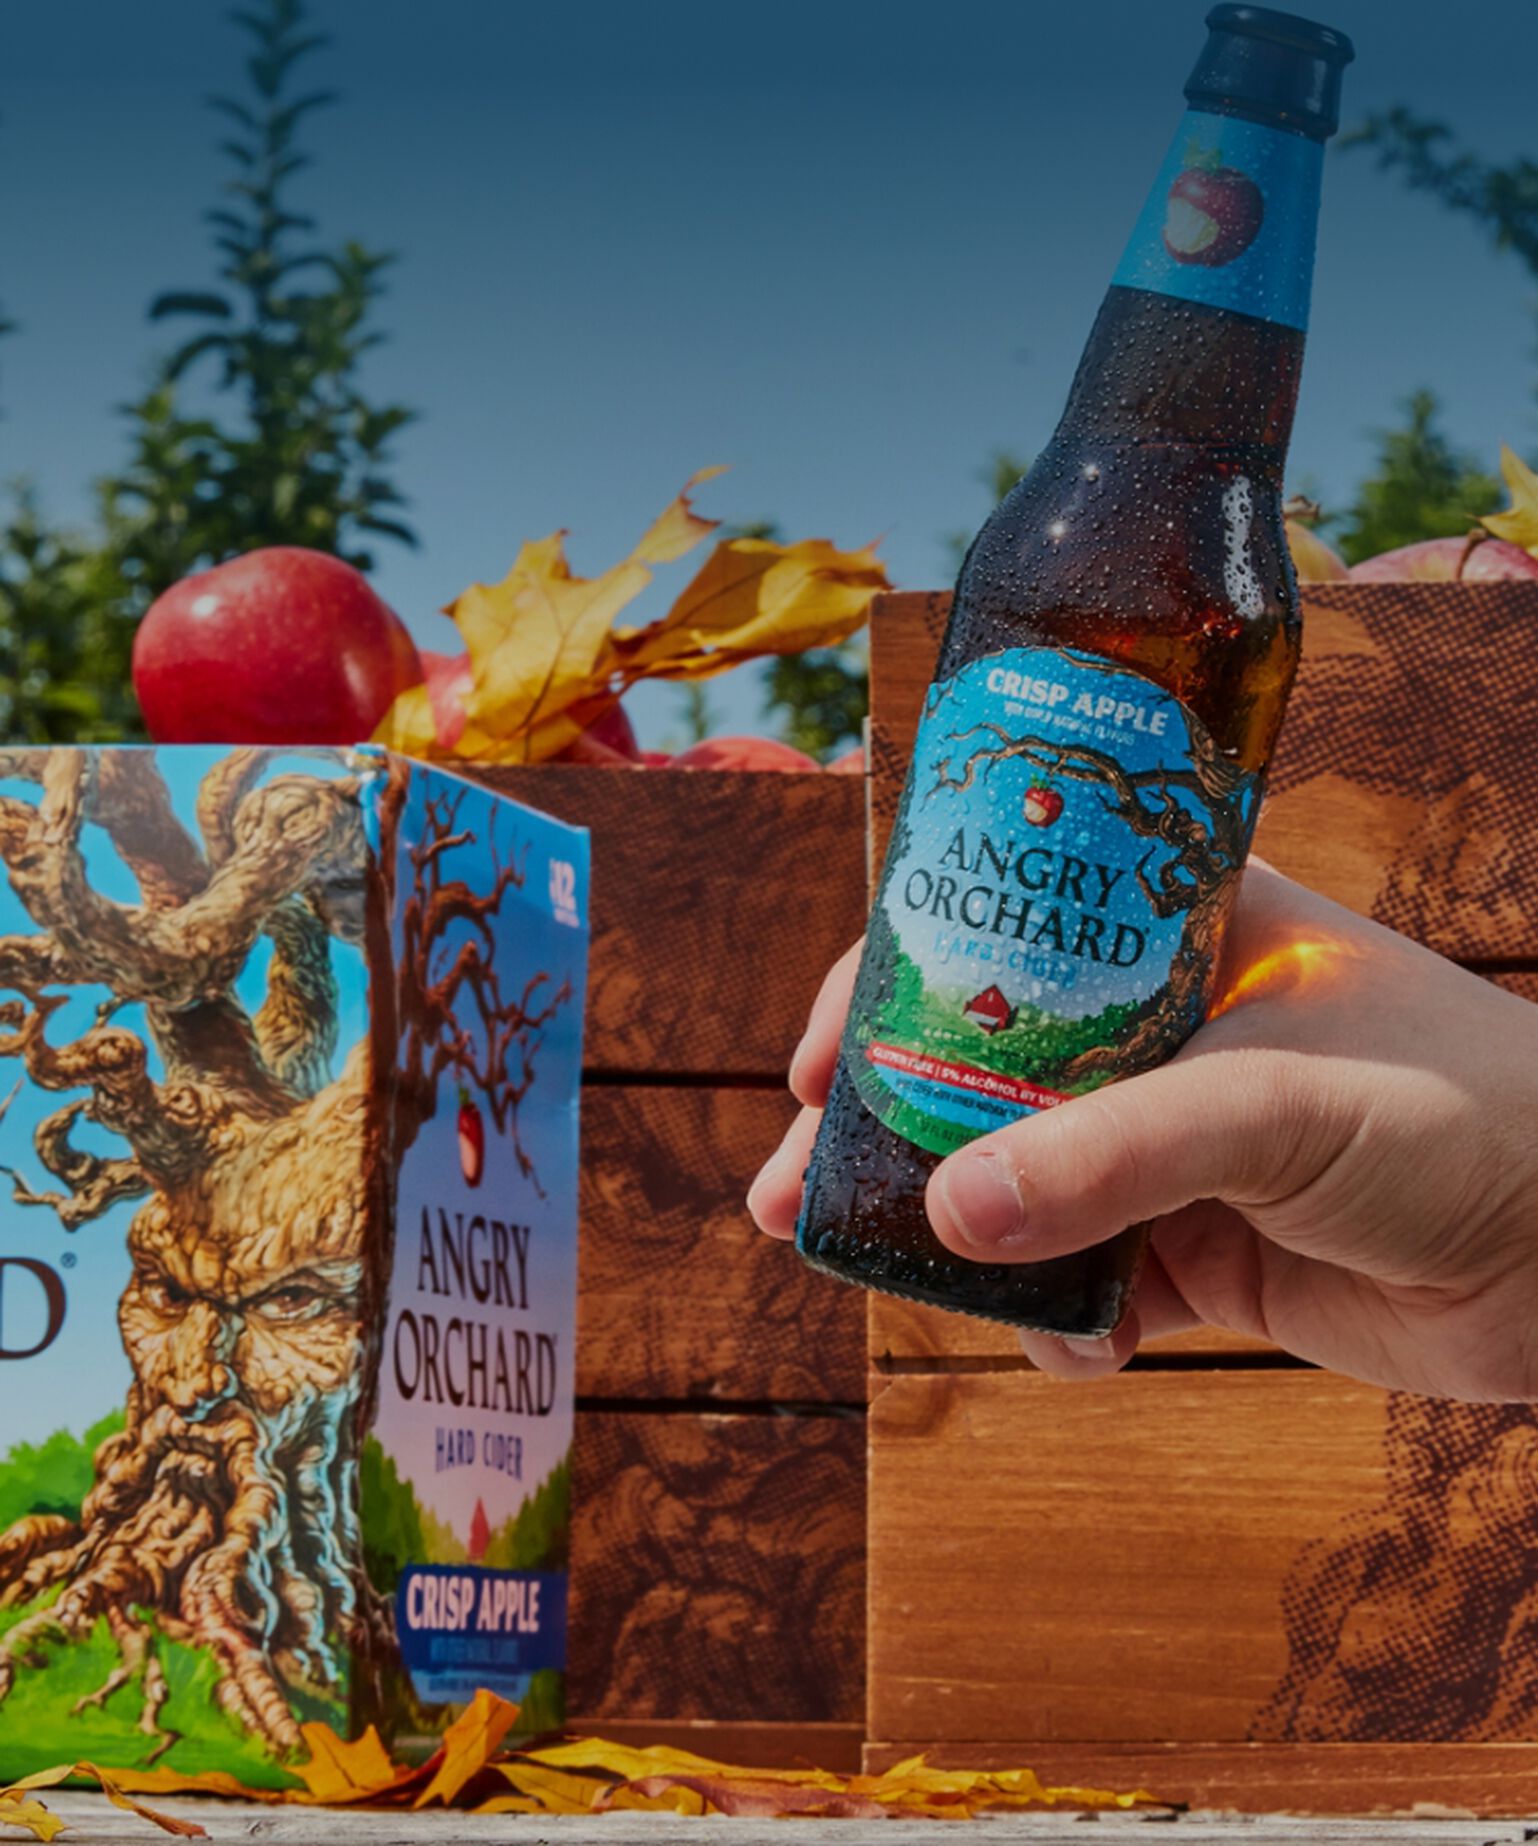 Bottle and case of Angry Orchard with apples